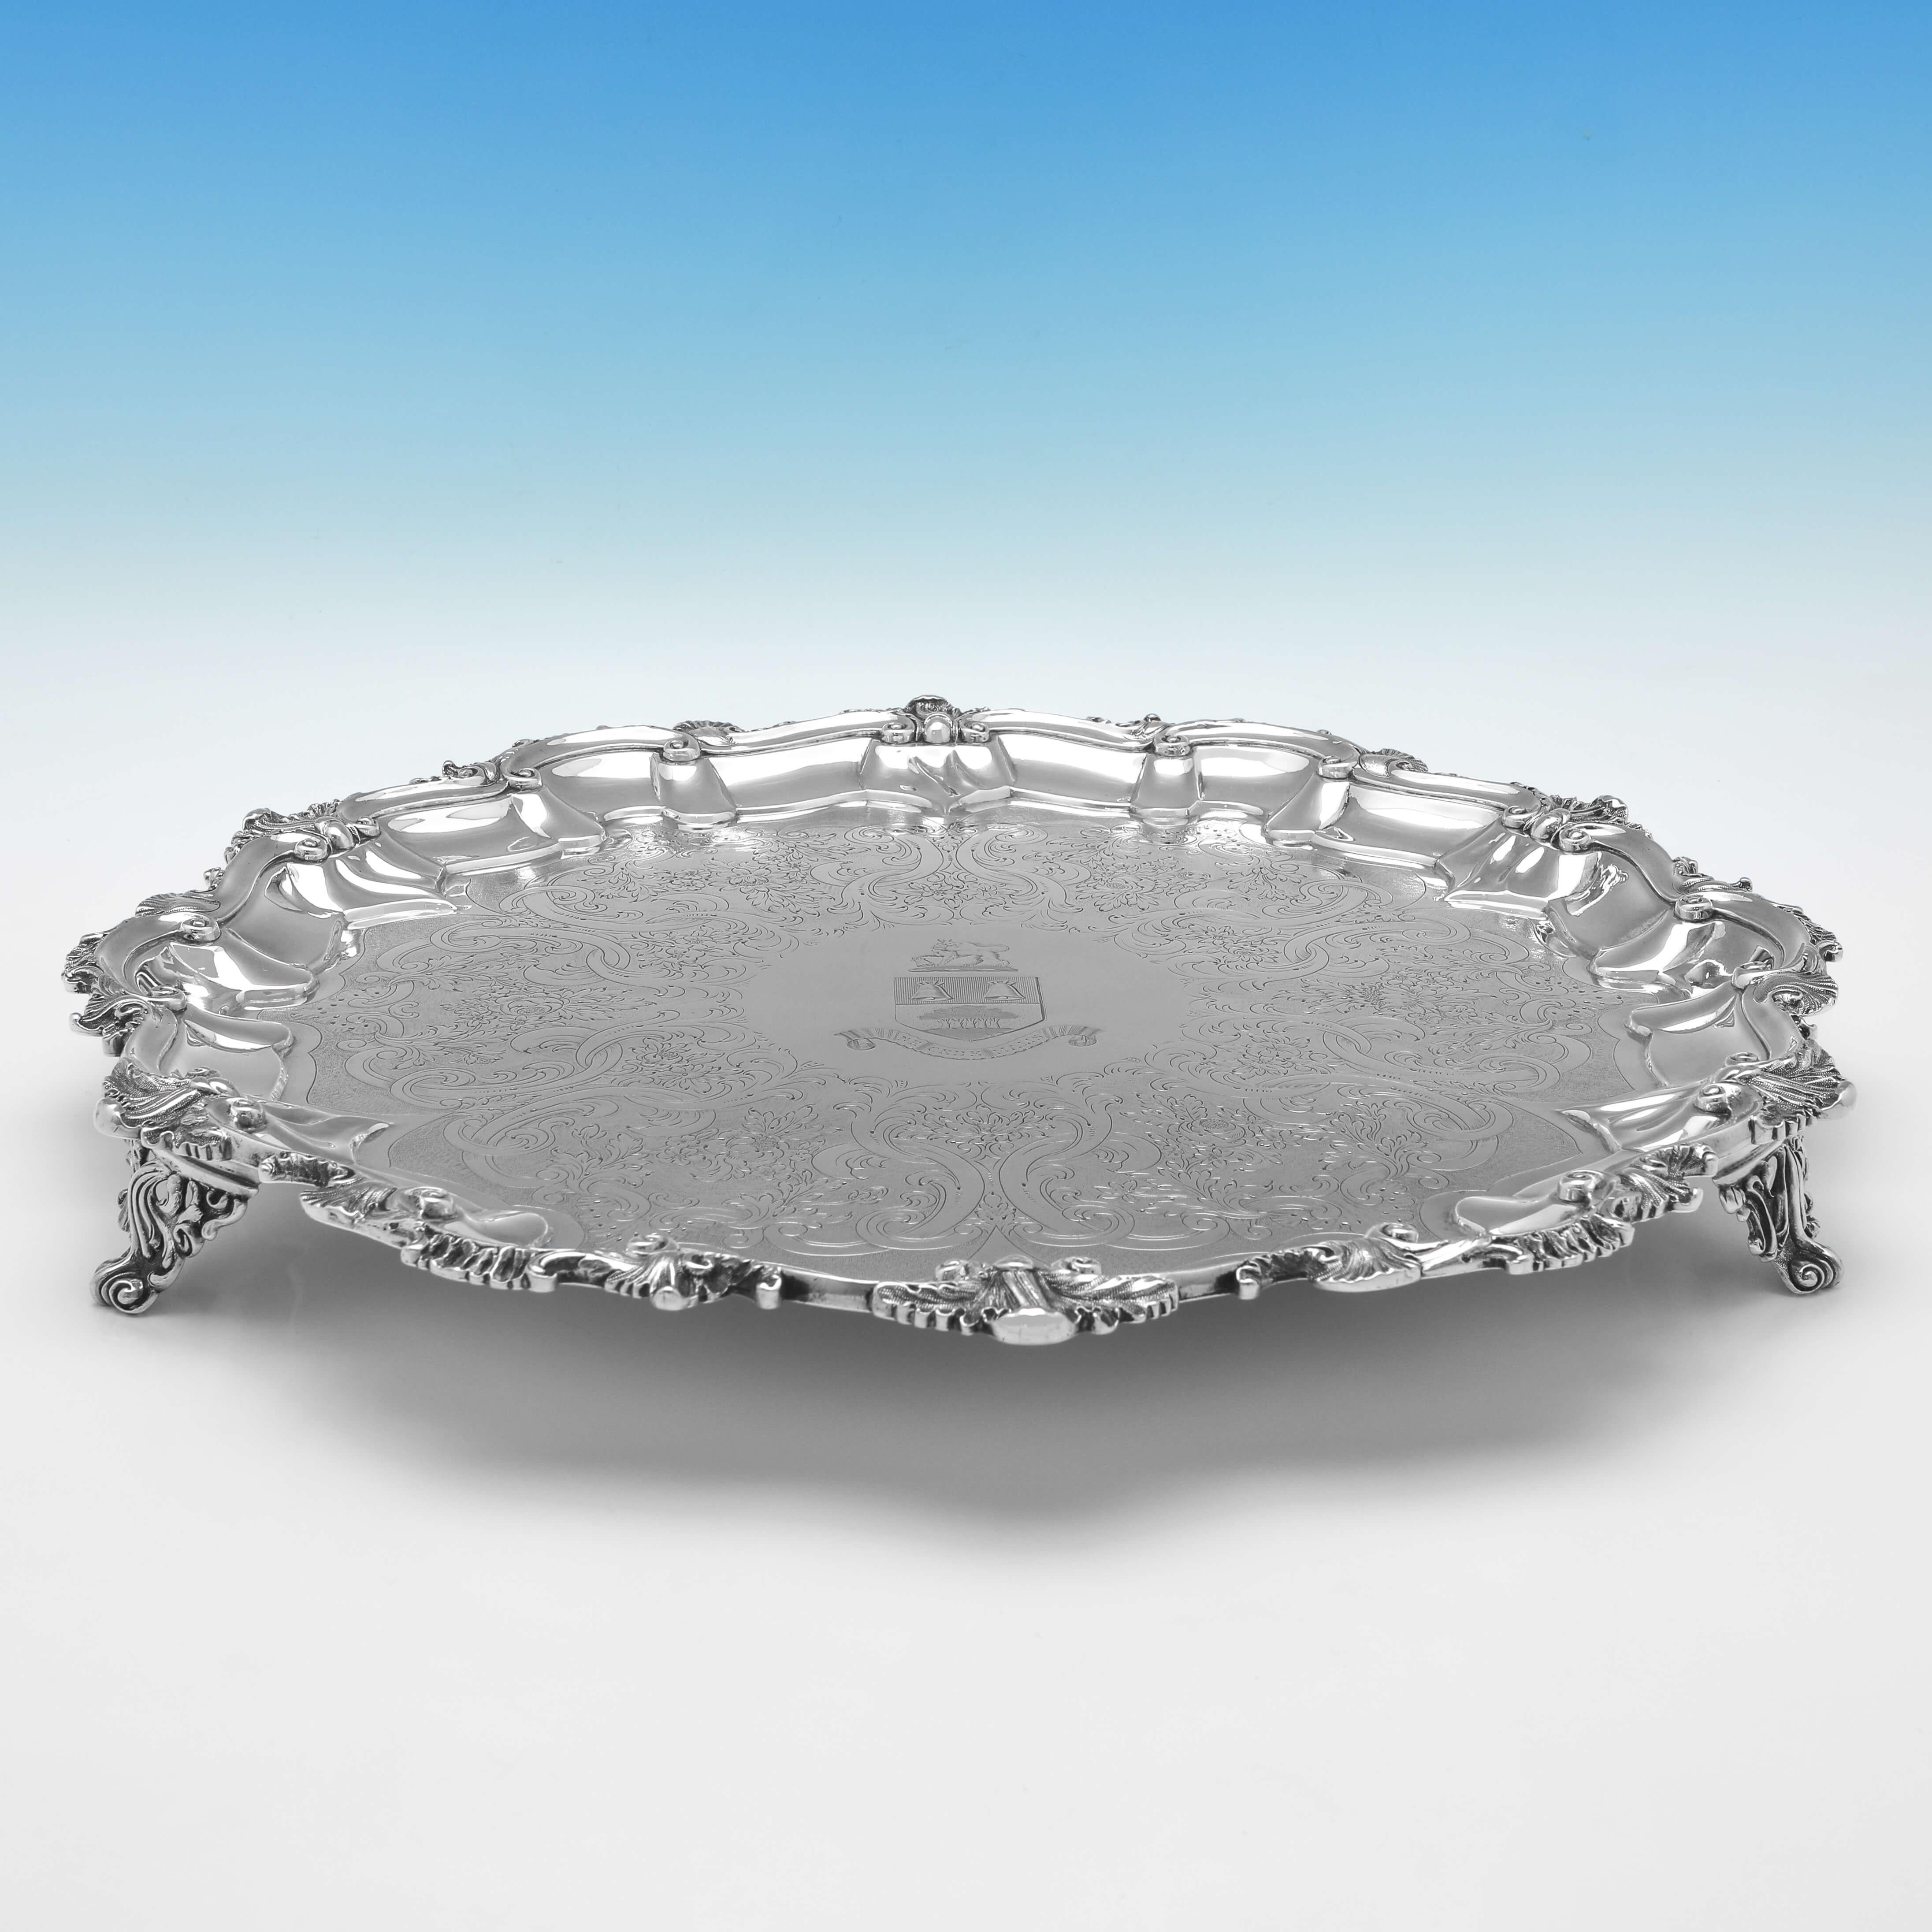 Hallmarked in Edinburgh in 1857 by J. Mckay, this attractive, Victorian, Antique Sterling Silver Salver, has a shell and scroll border, engraved decoration, and an engraved coat of arms to the centre. 

The salver measures 17.25